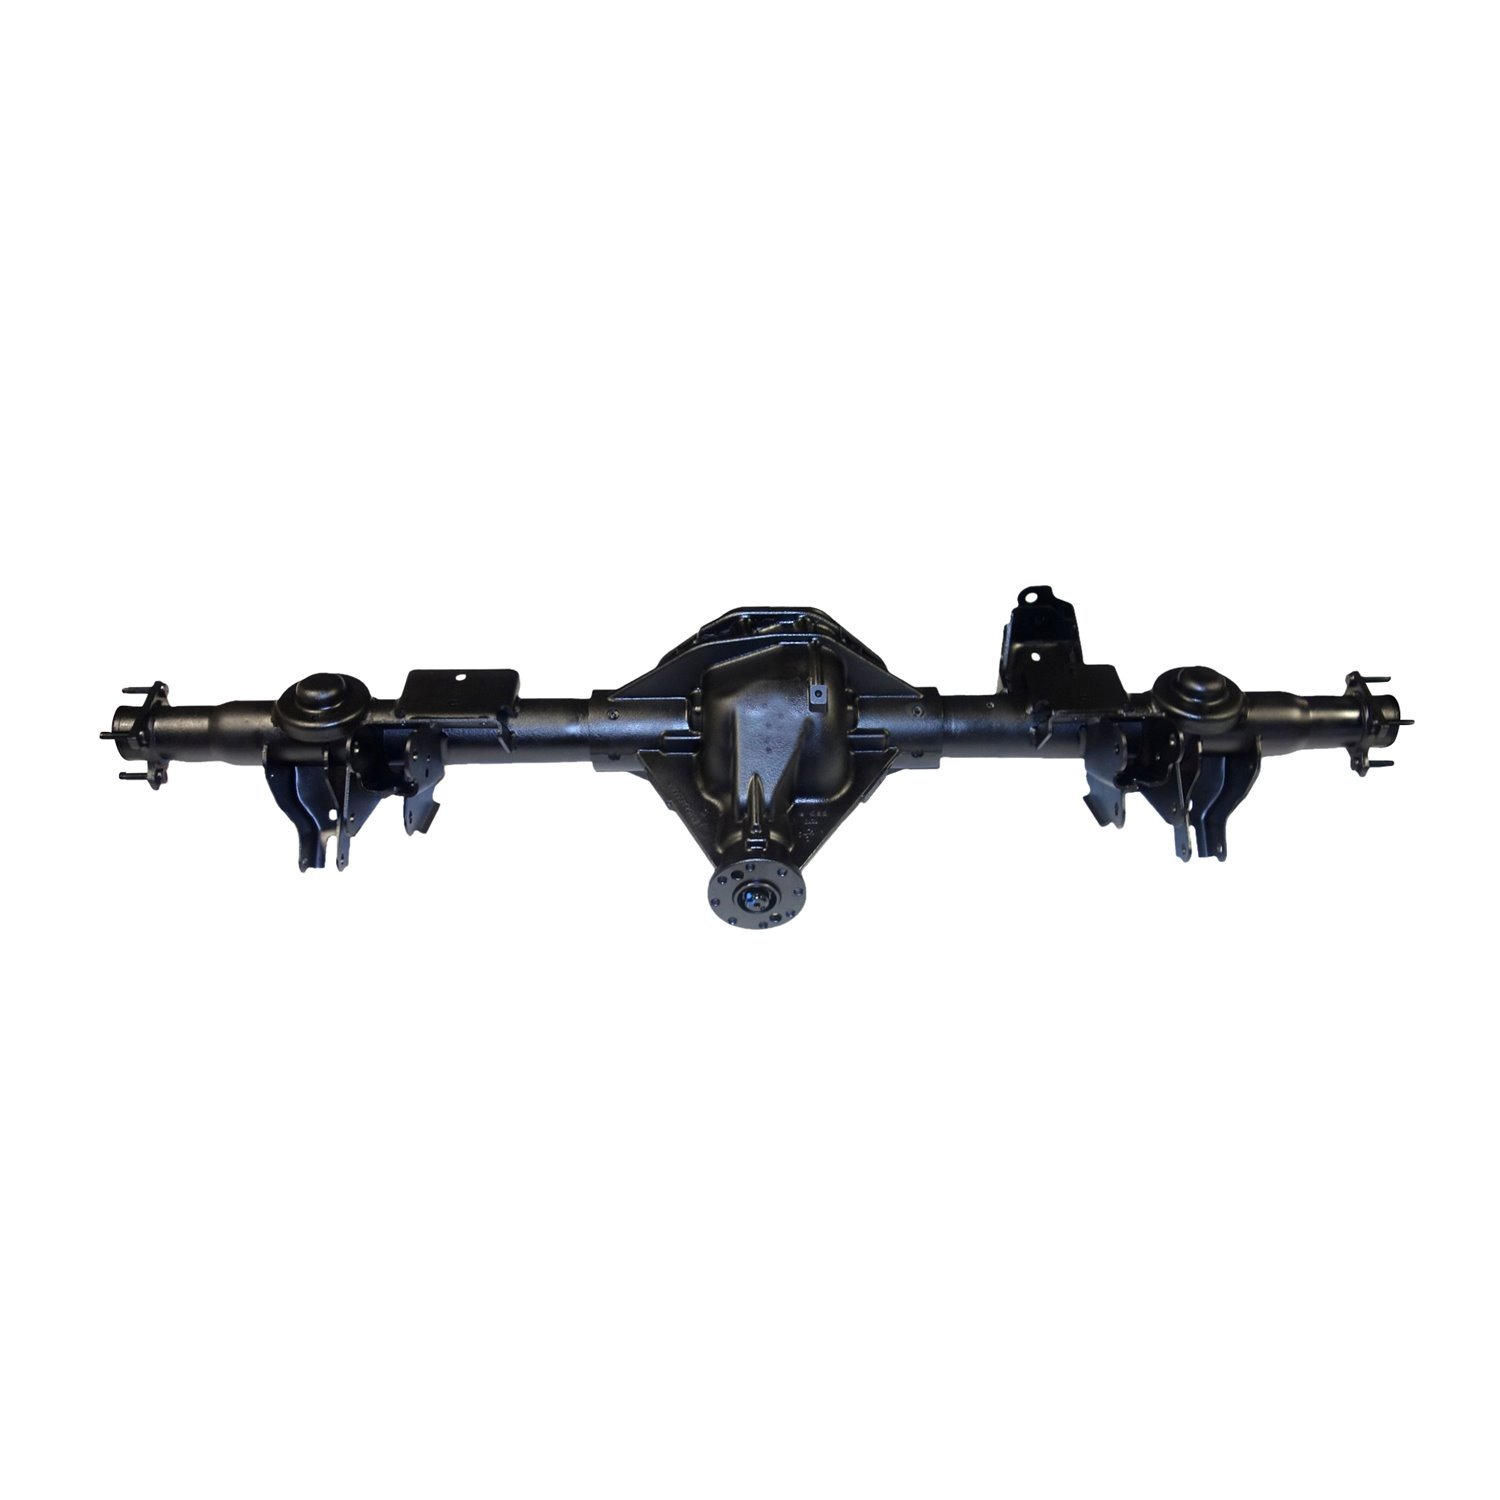 Remanufactured Complete Axle Assembly for Chrysler 9.25ZF 2012 Dodge Ram 1500 3.55 Ratio